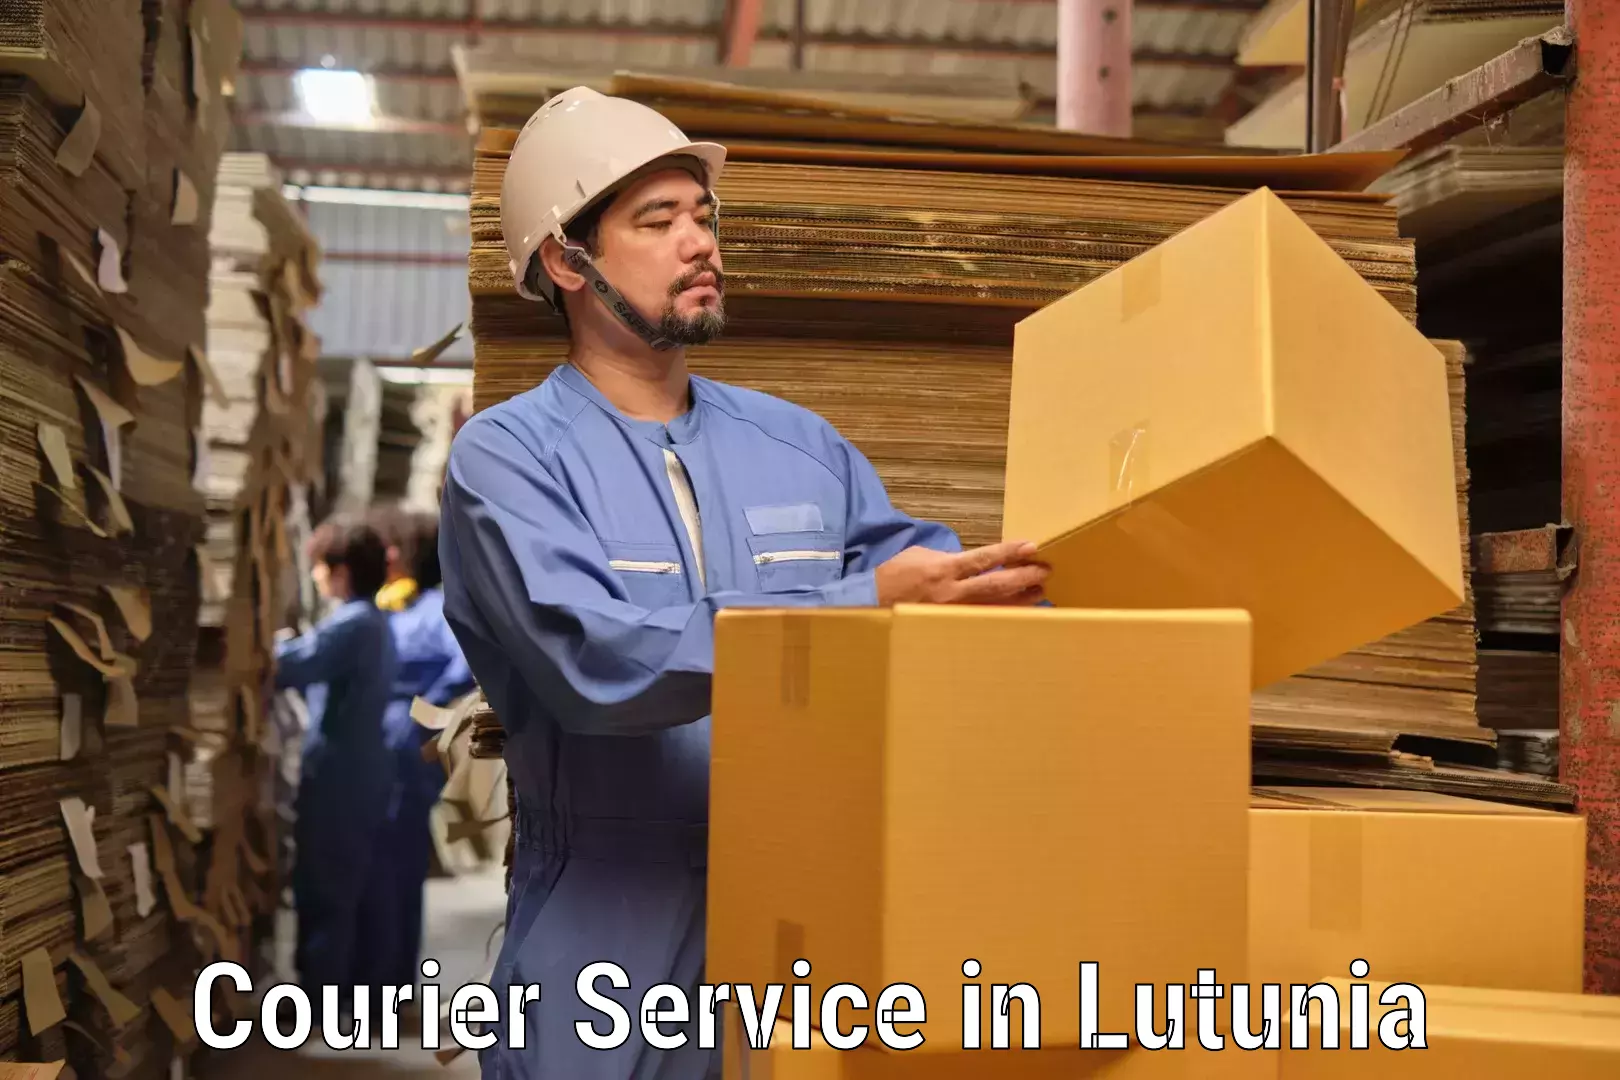 Sustainable courier practices in Lutunia